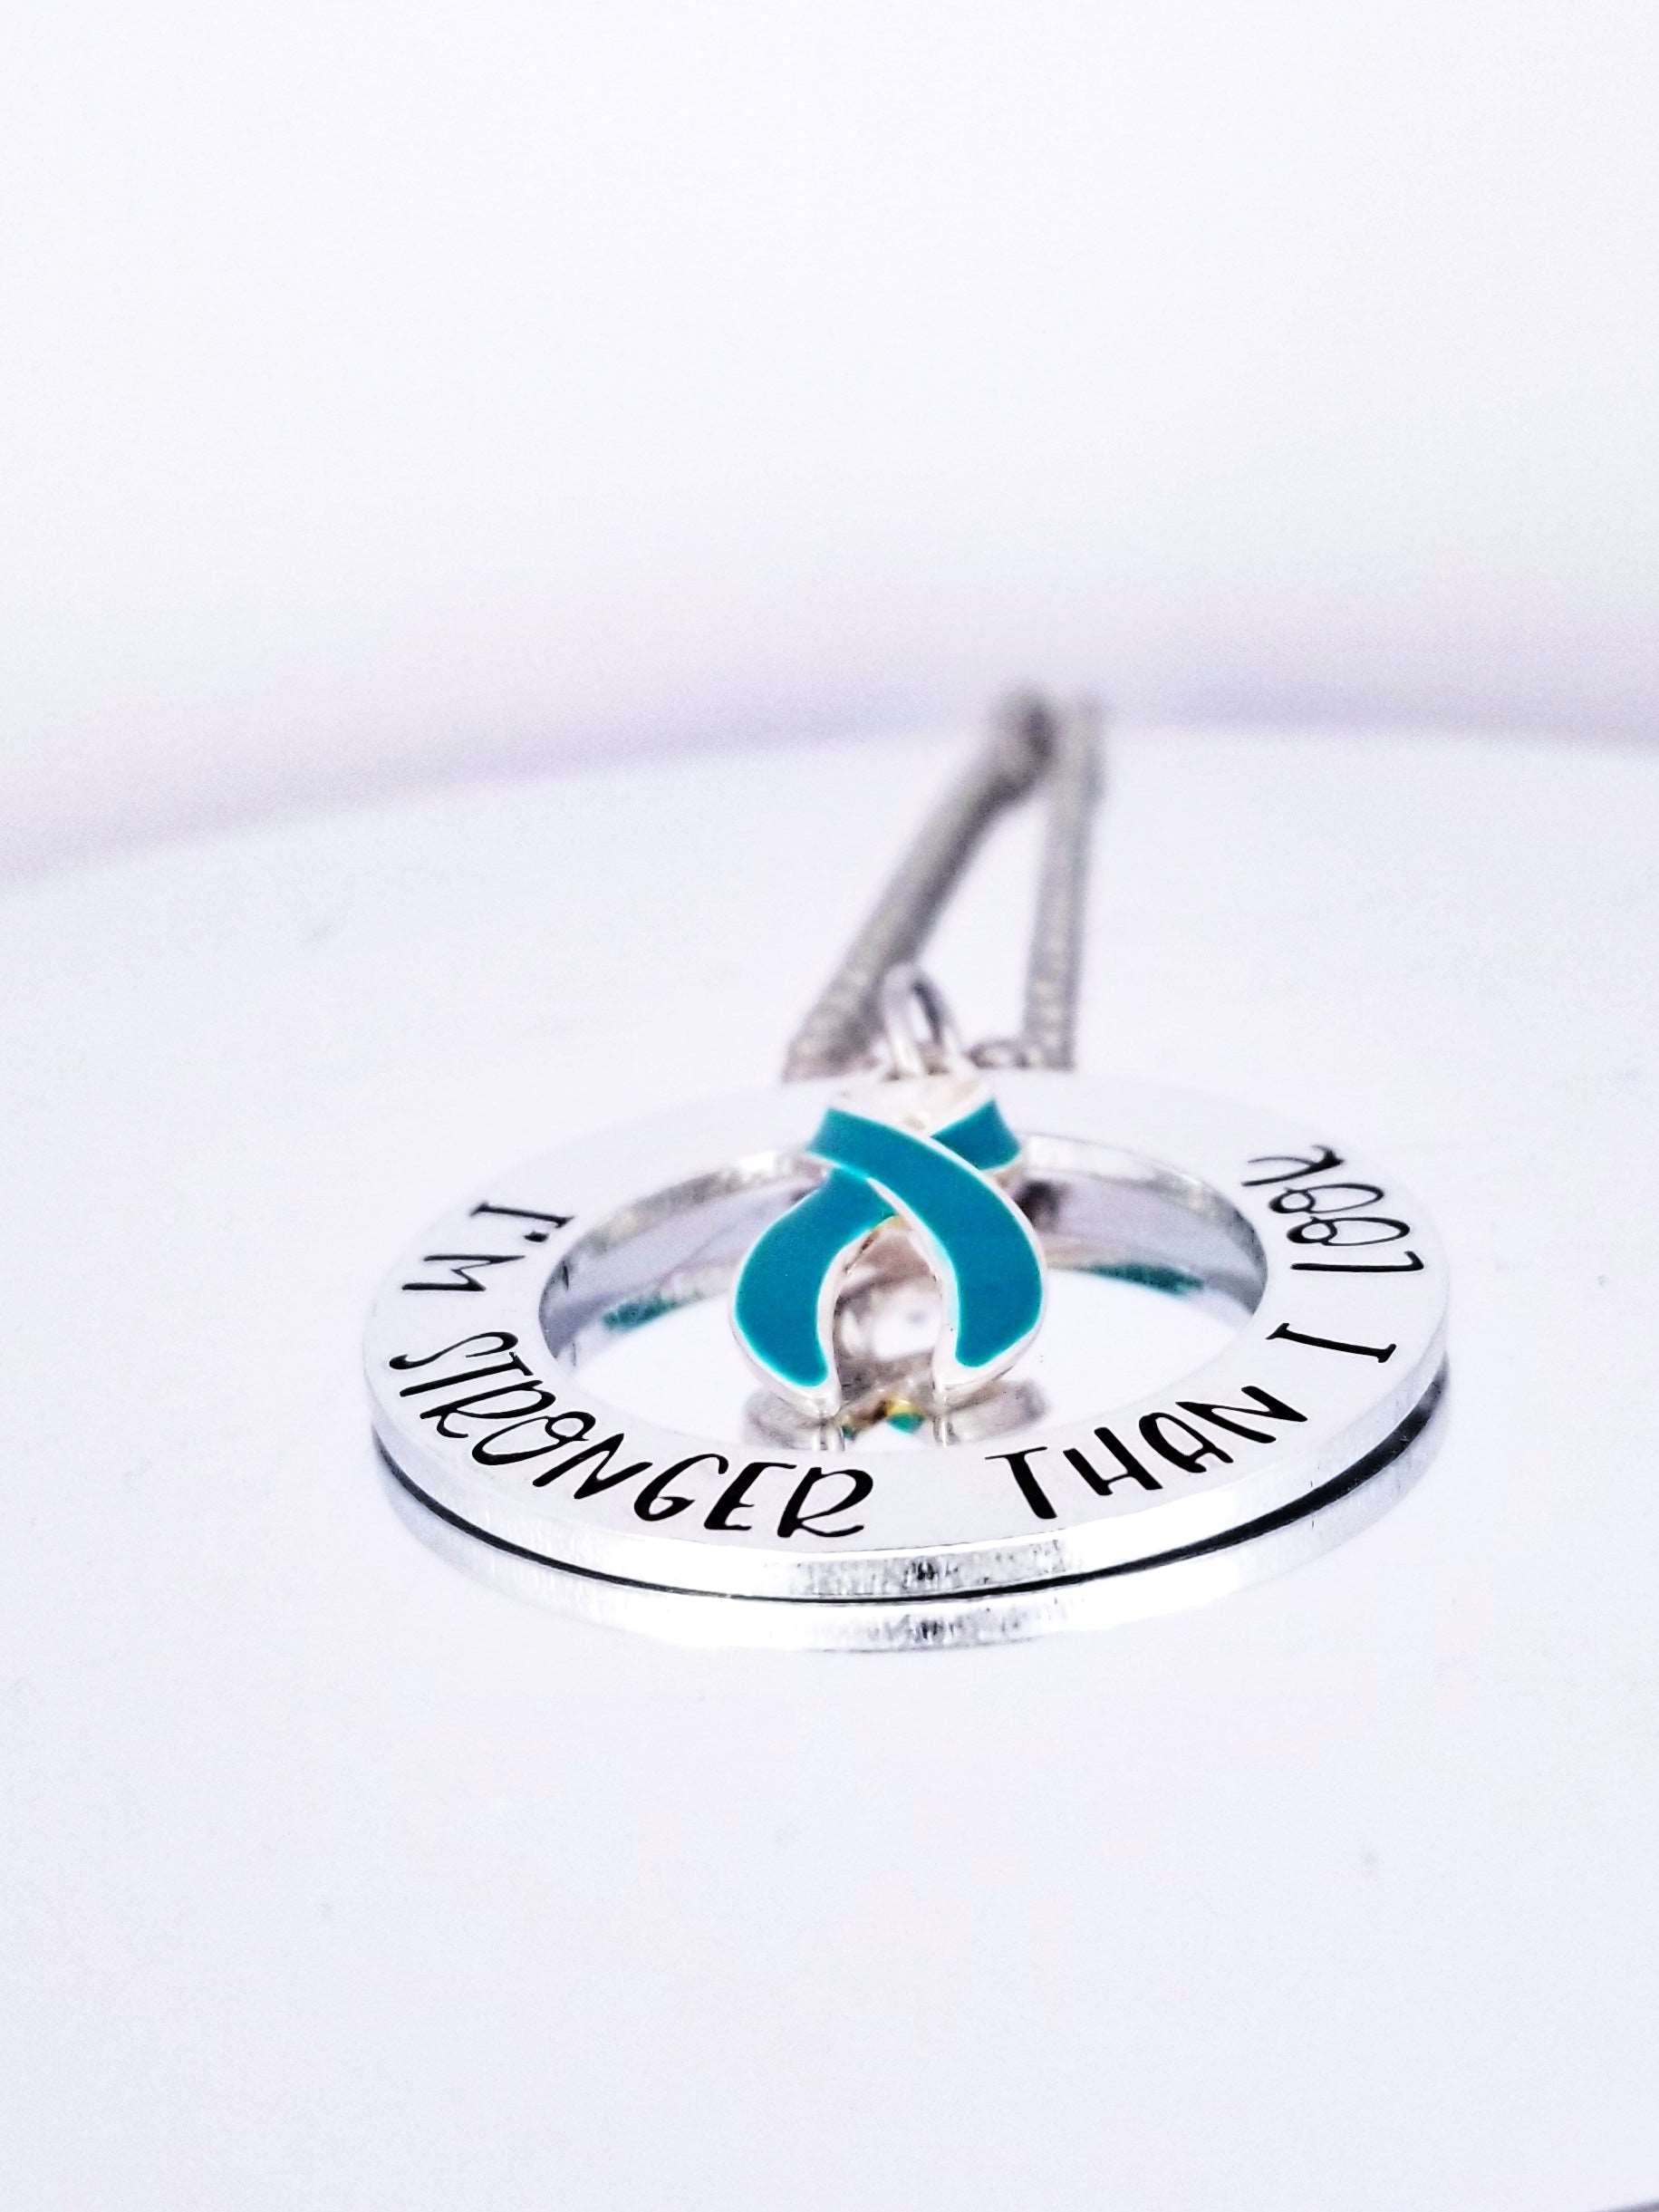 I'm Stronger Than I Look necklace - Ovarian Cancer, Scleroderma, PTSD, Ocd, Tourette's Synodrome